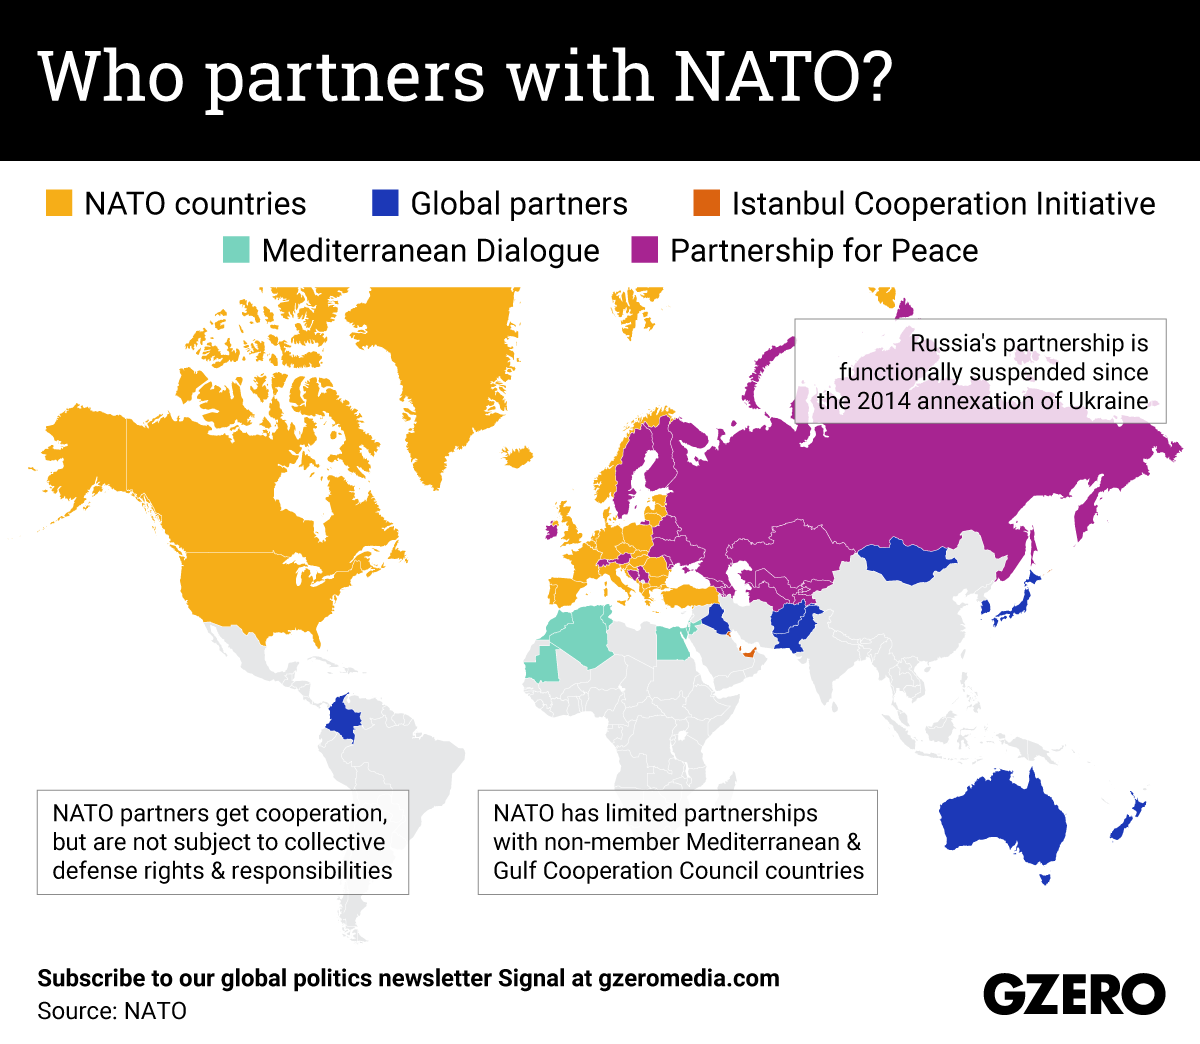 The Graphic Truth: Who partners with NATO?